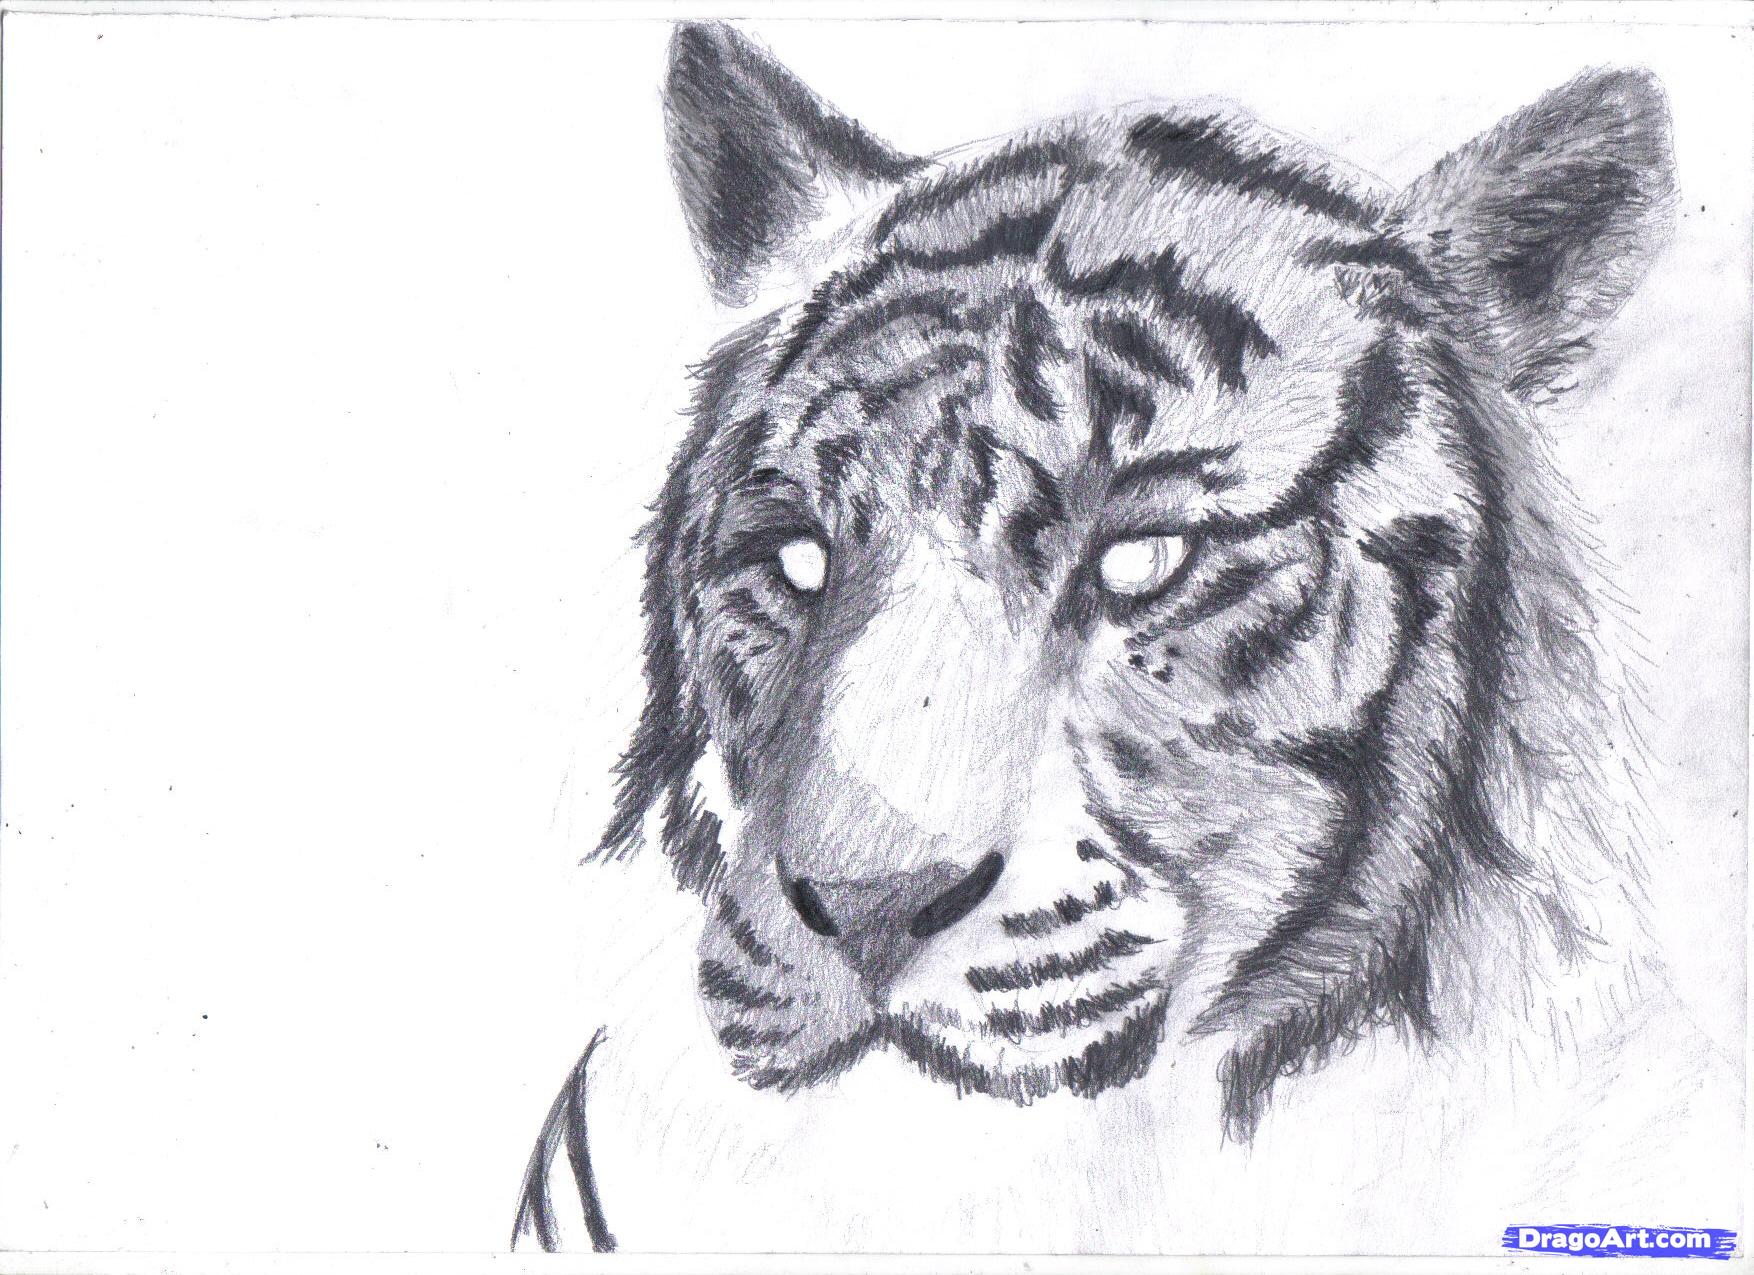 How To Draw A White Tiger Draw A Tiger In Pencil Step By Step